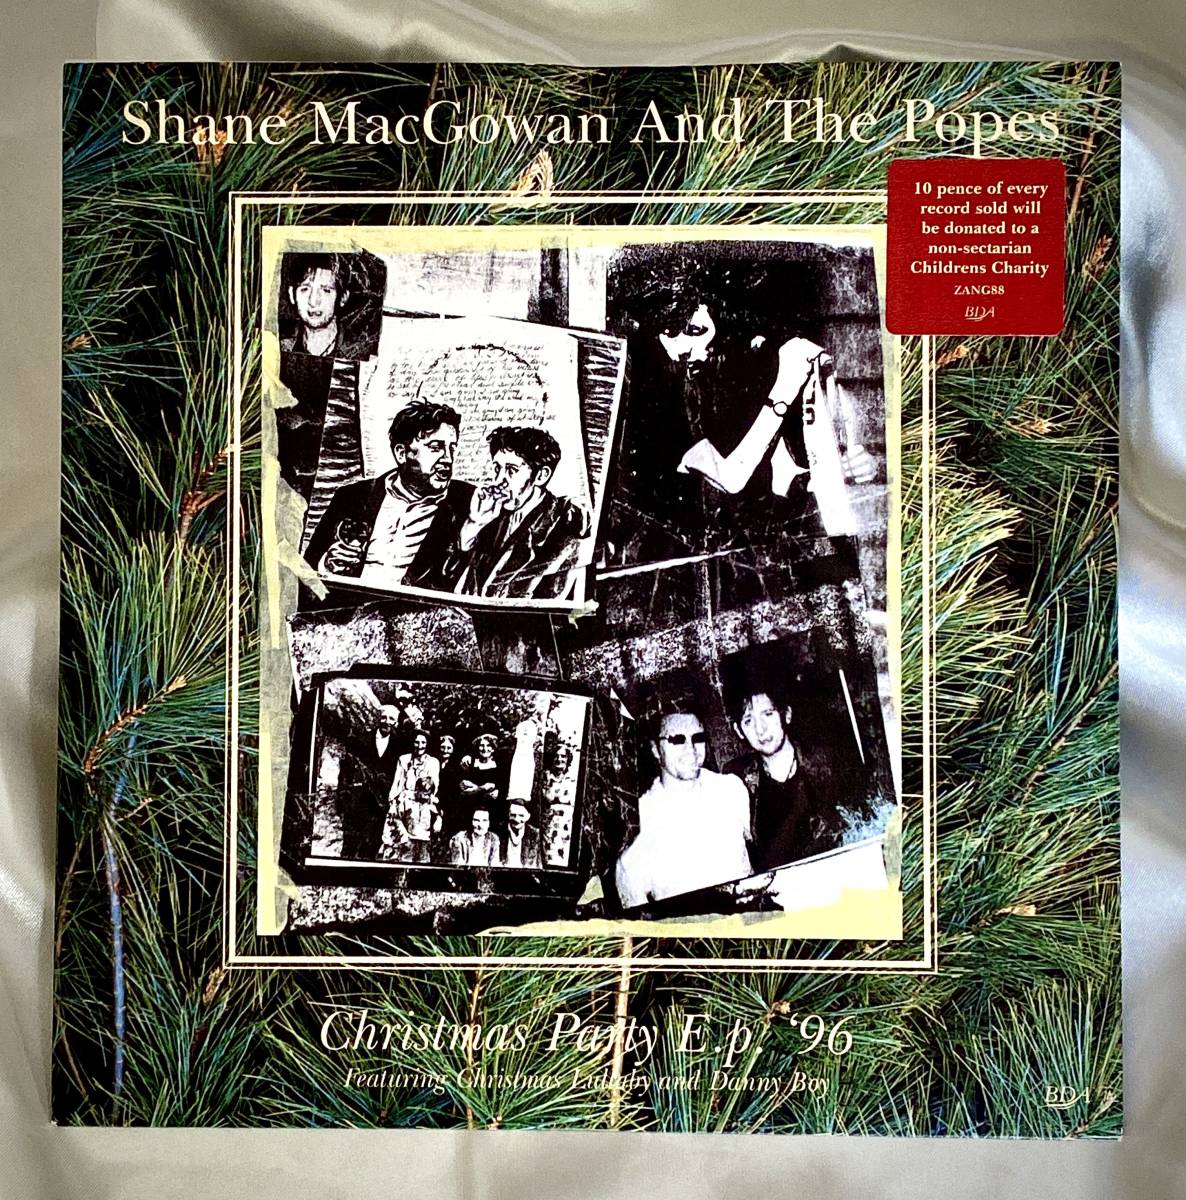 ★Shane MacGowan And The Popes / Christmas Party E.P. '96●1996年UK盤(ZANG 88) シェイン・マガウアン/ POGUES / ポーグス_画像1